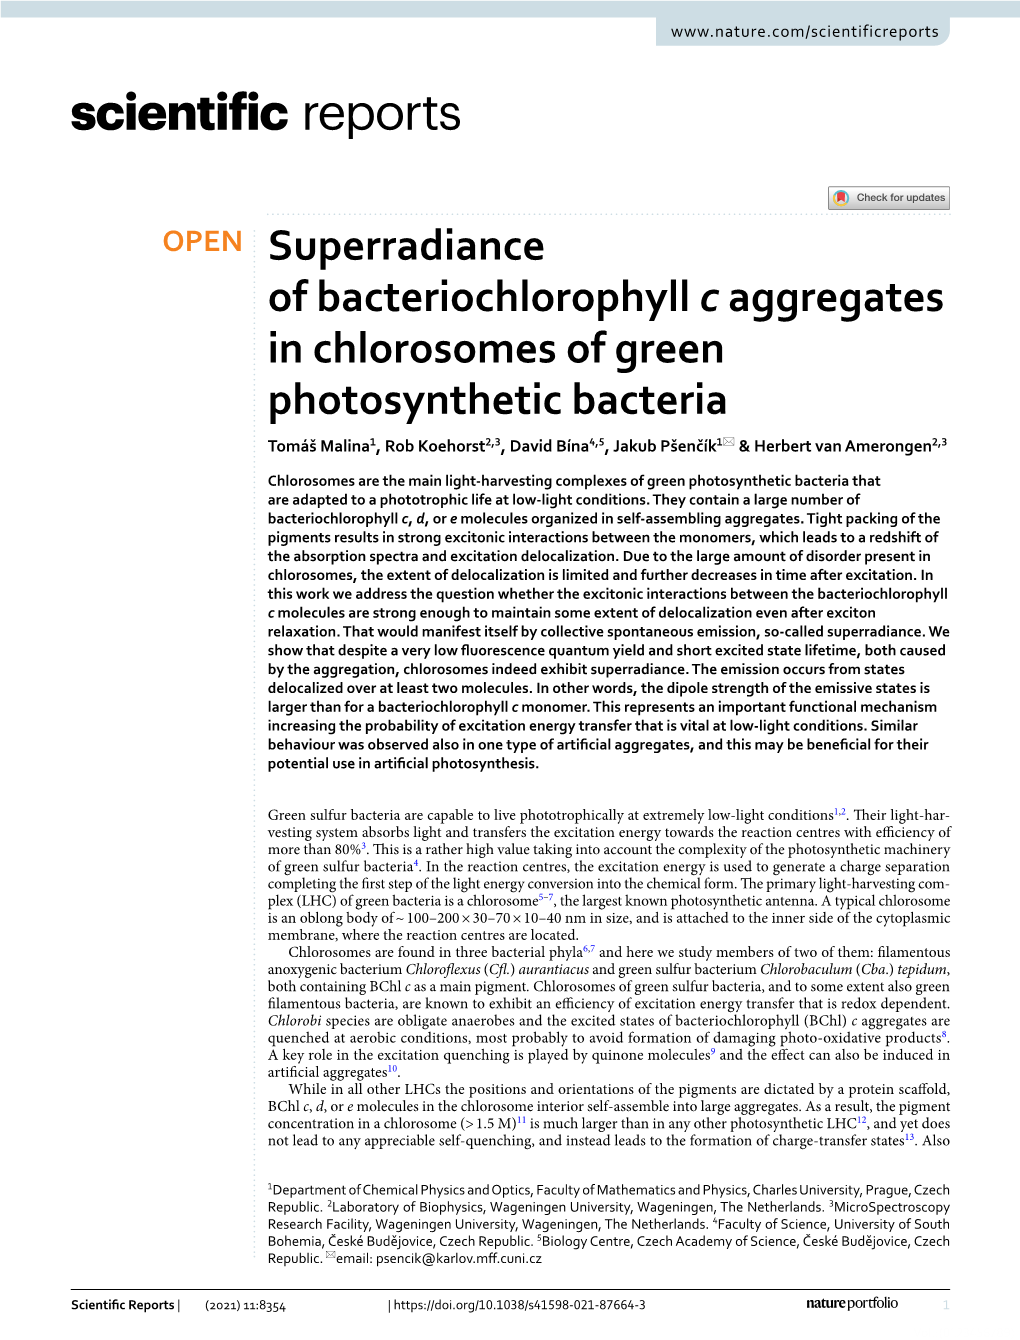 Superradiance of Bacteriochlorophyll C Aggregates in Chlorosomes Of